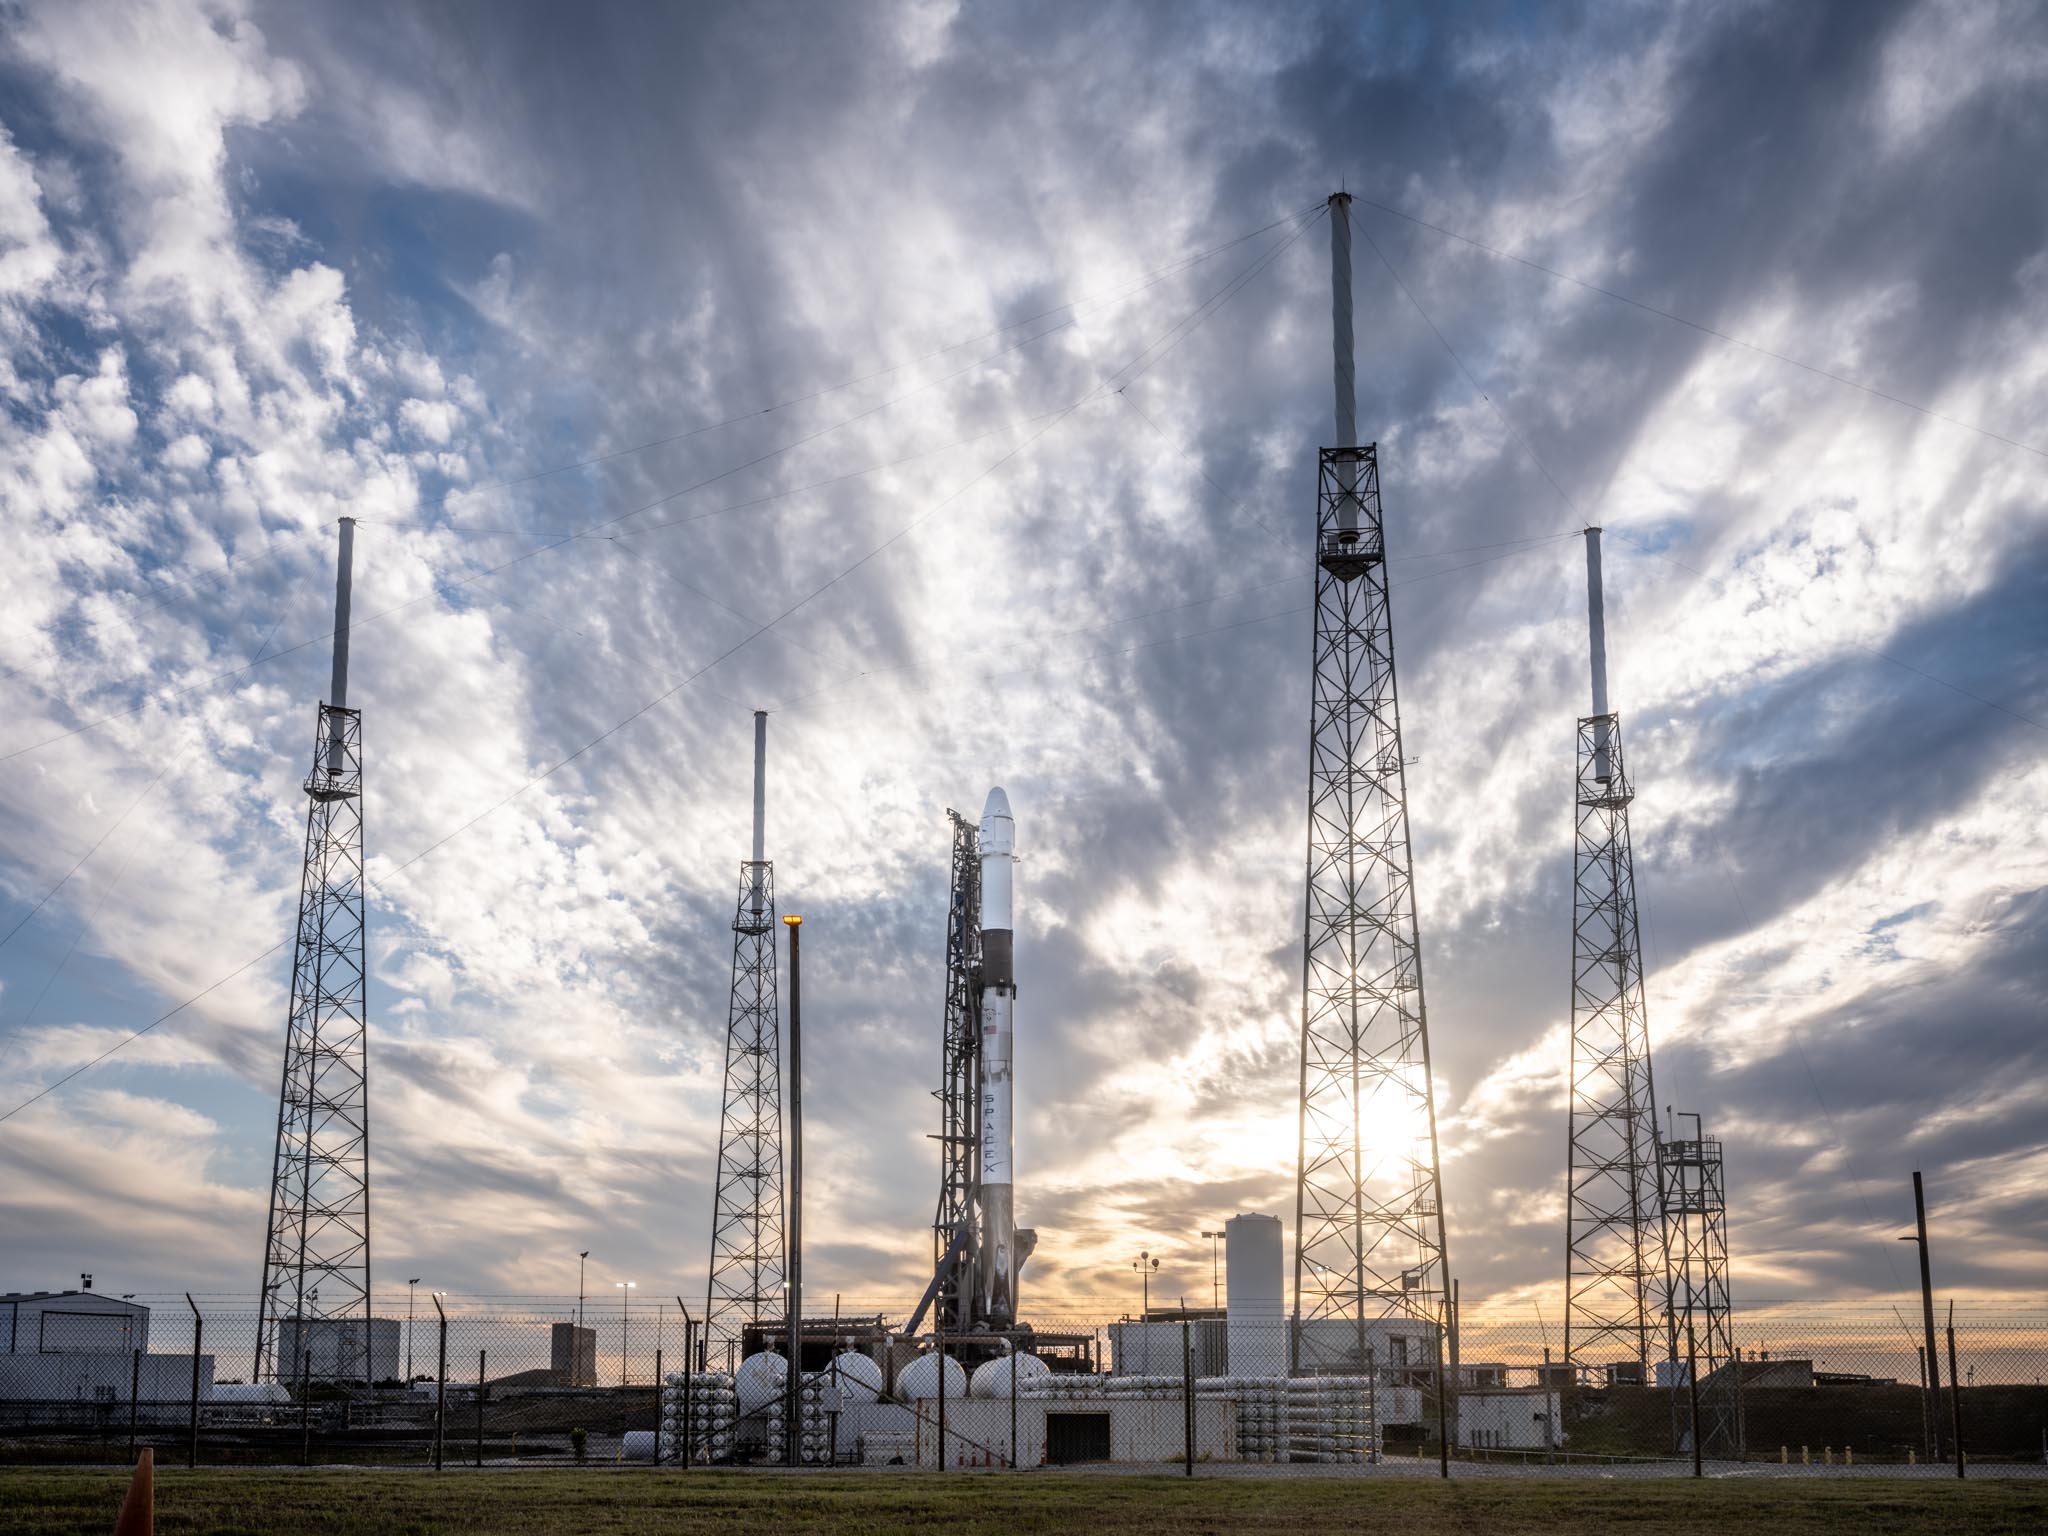 a rocket launch pad with several towers